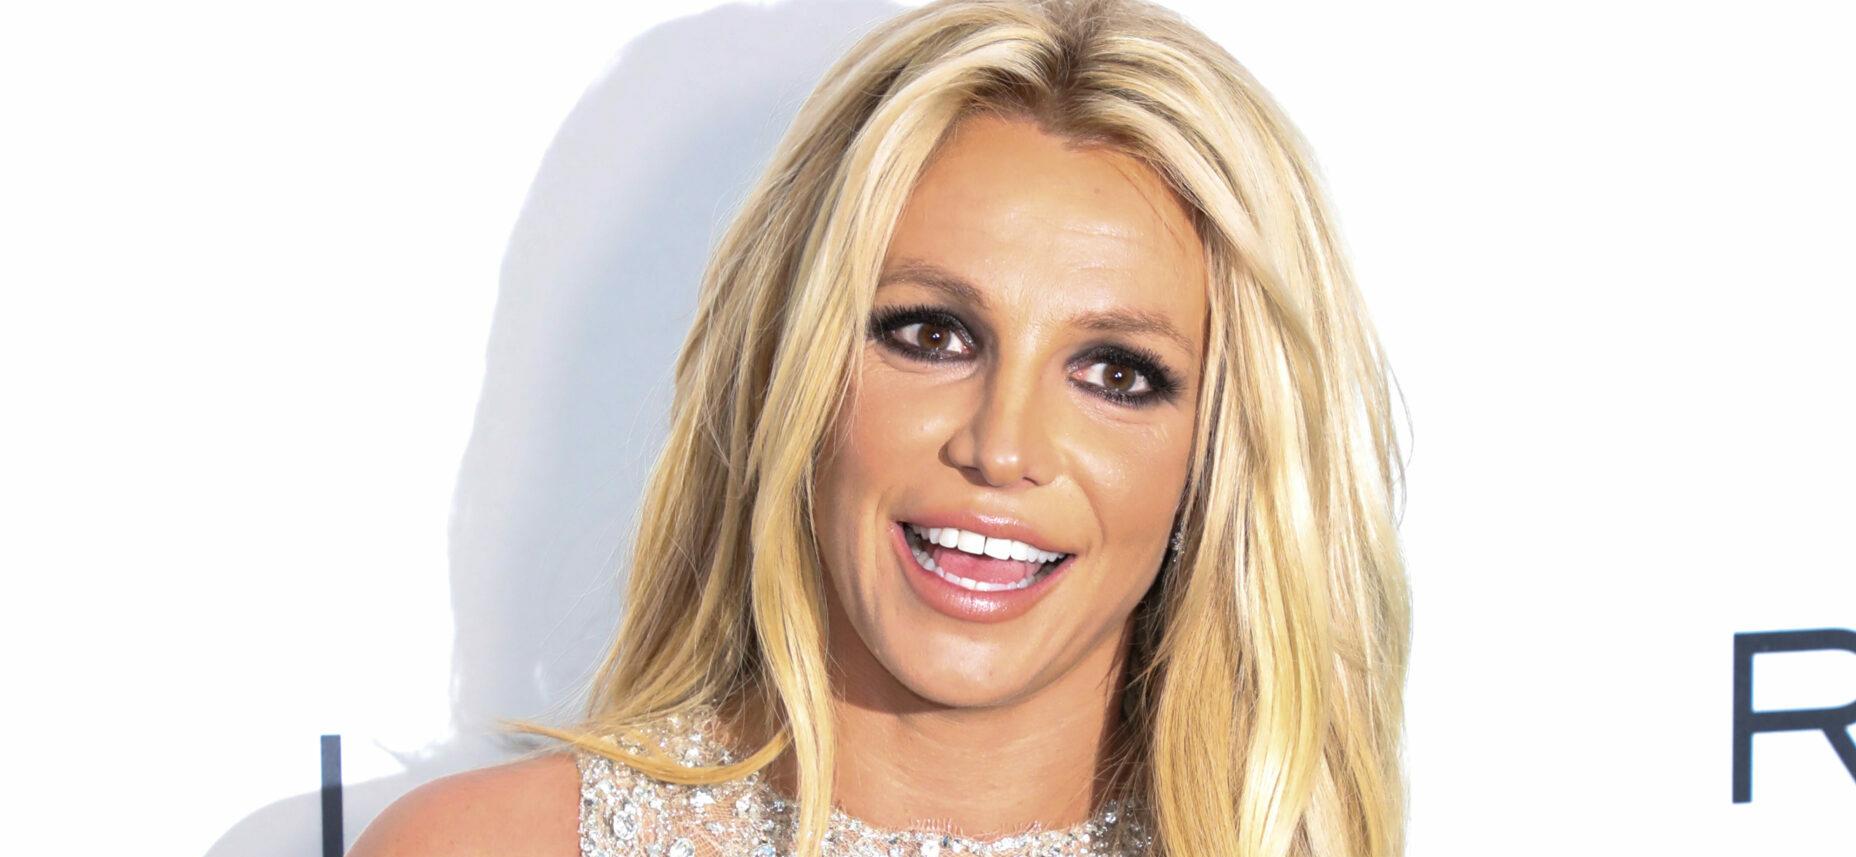 Is Britney Spears Hiding Her Teeth To Avoid Accusations Of AI?